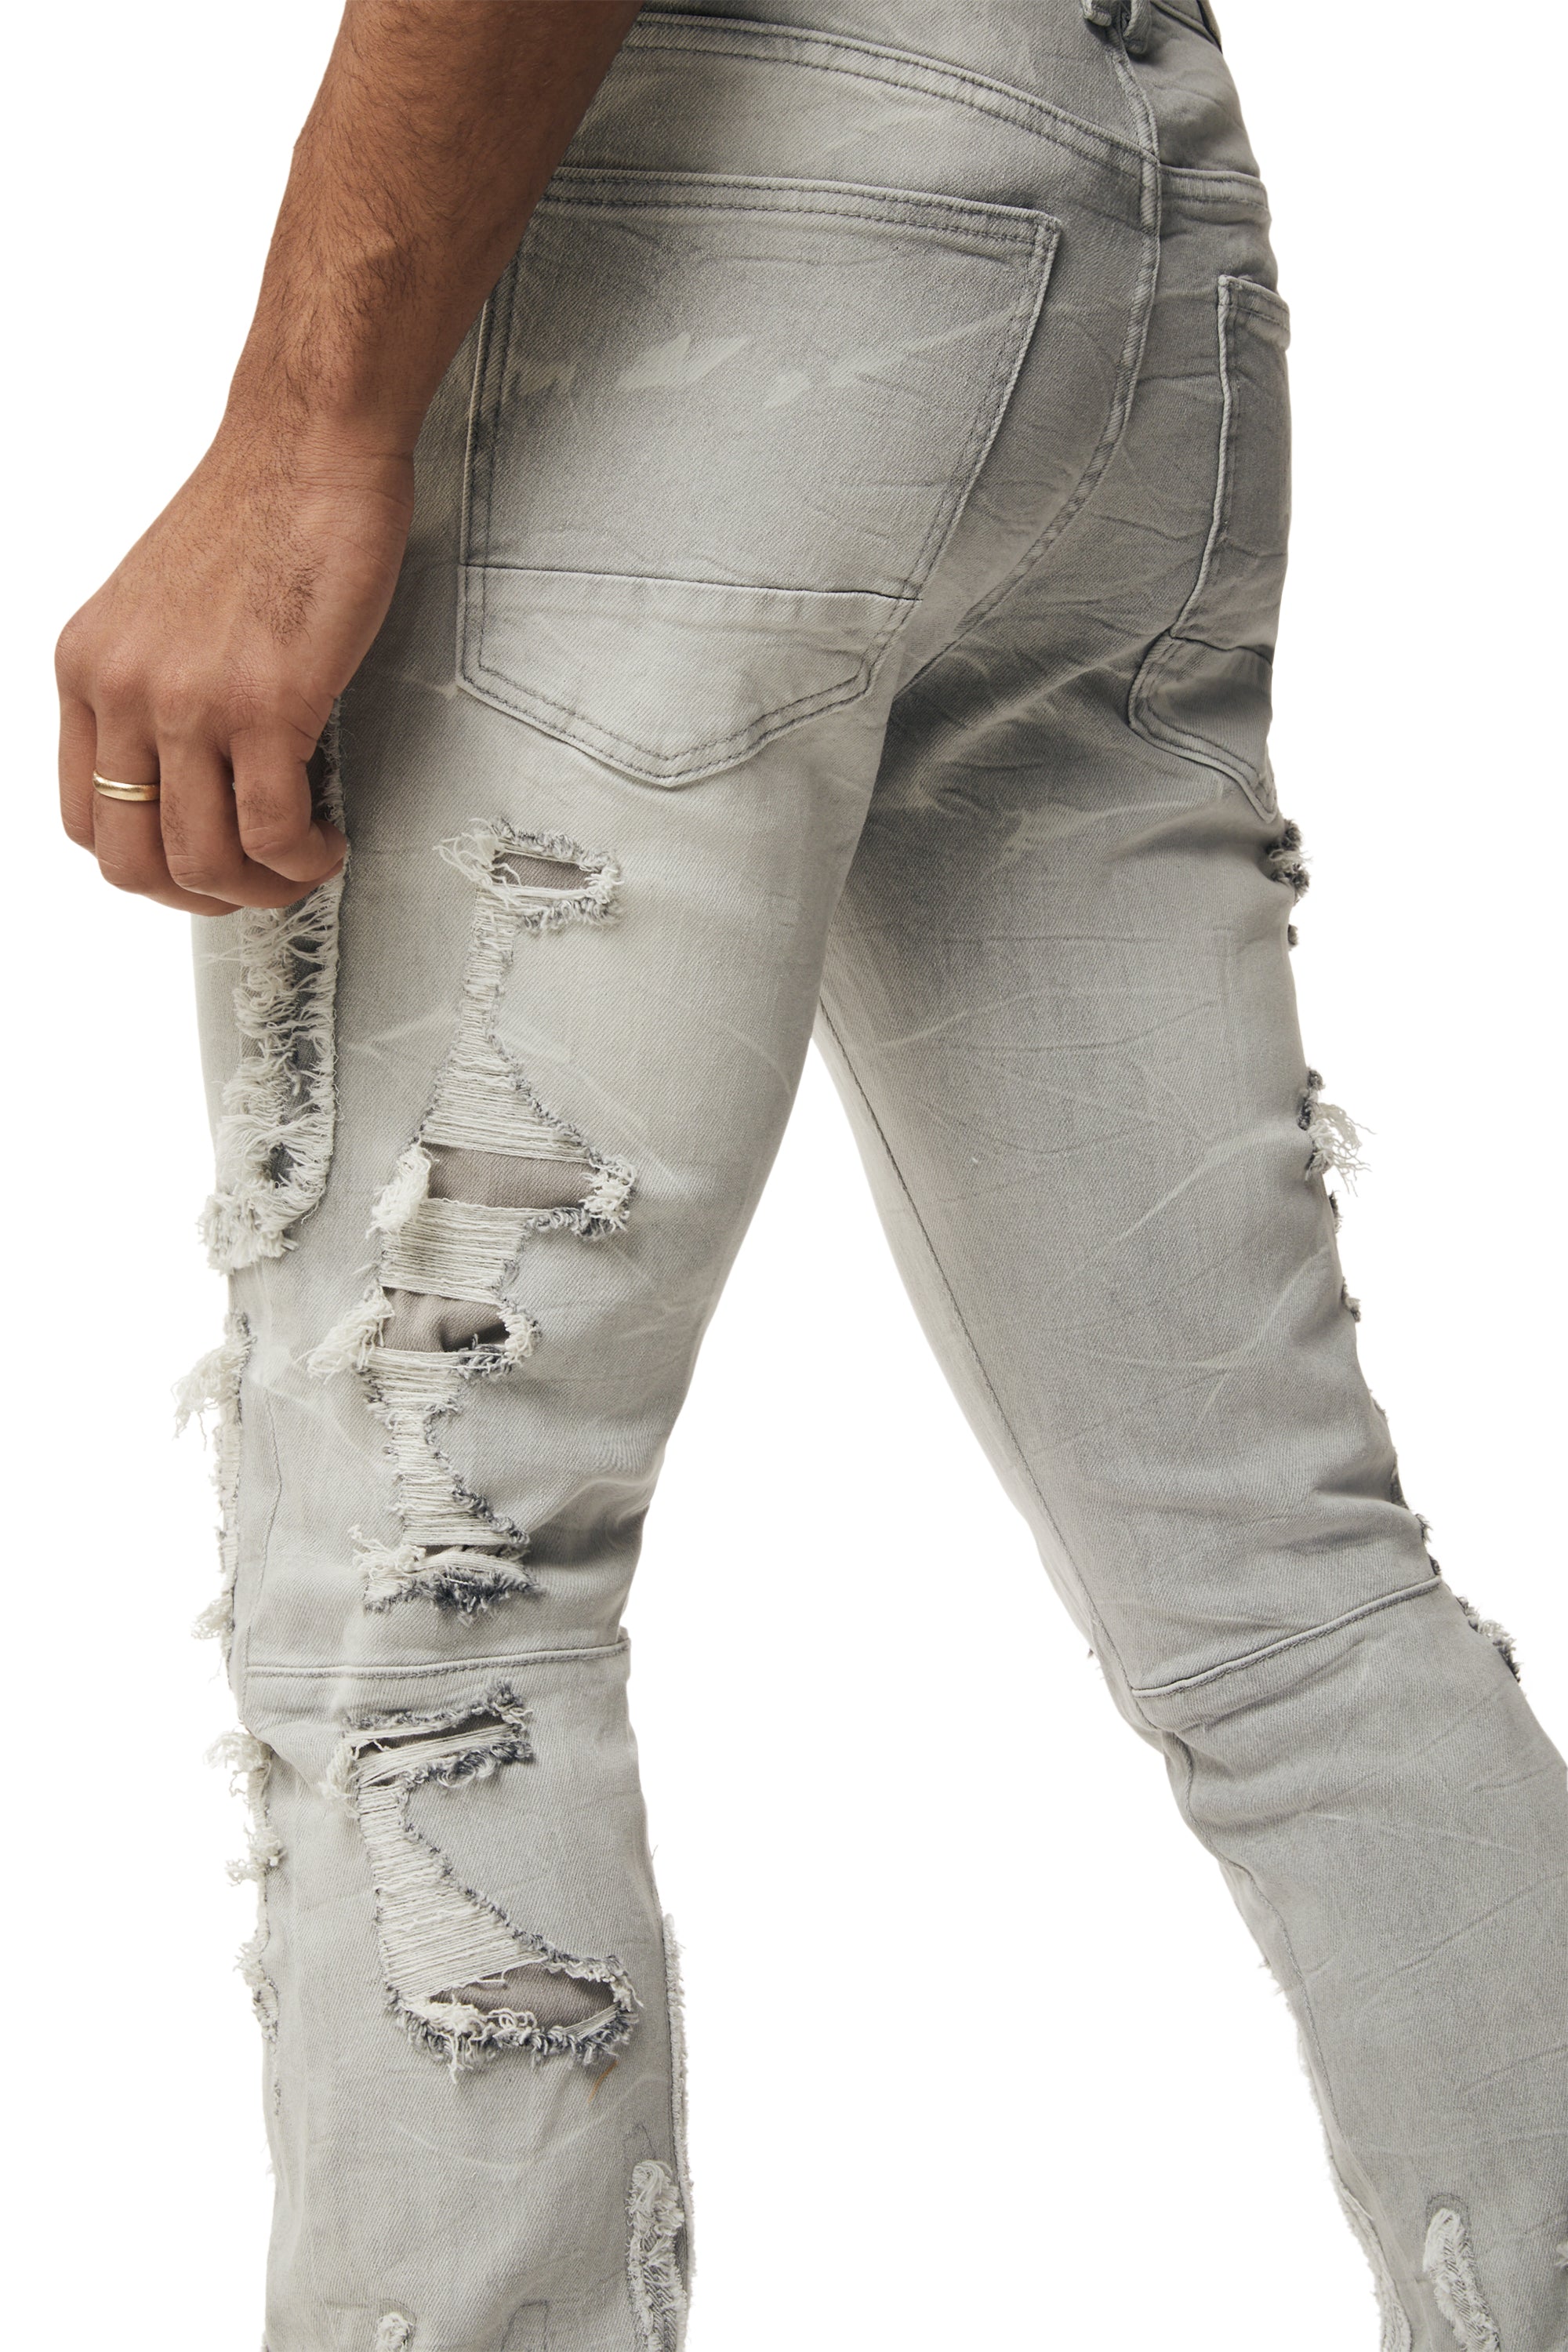 Flame Applique Heavy R&R Stacked Denim Jeans - Cloud Grey